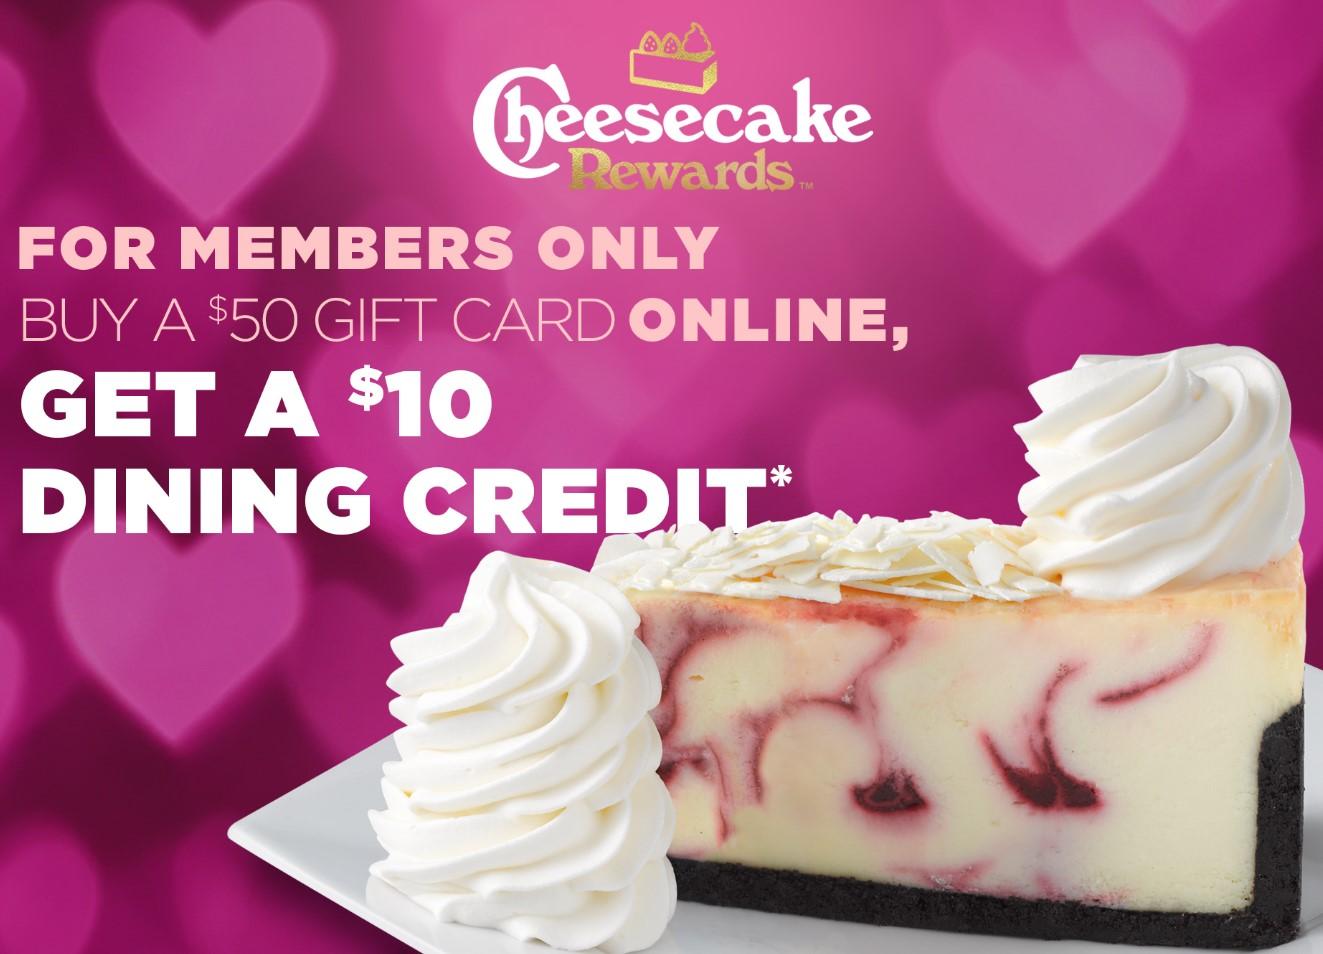 Cheesecake Factory Free $10 Dining Credit When You Buy a $50 Gift Card